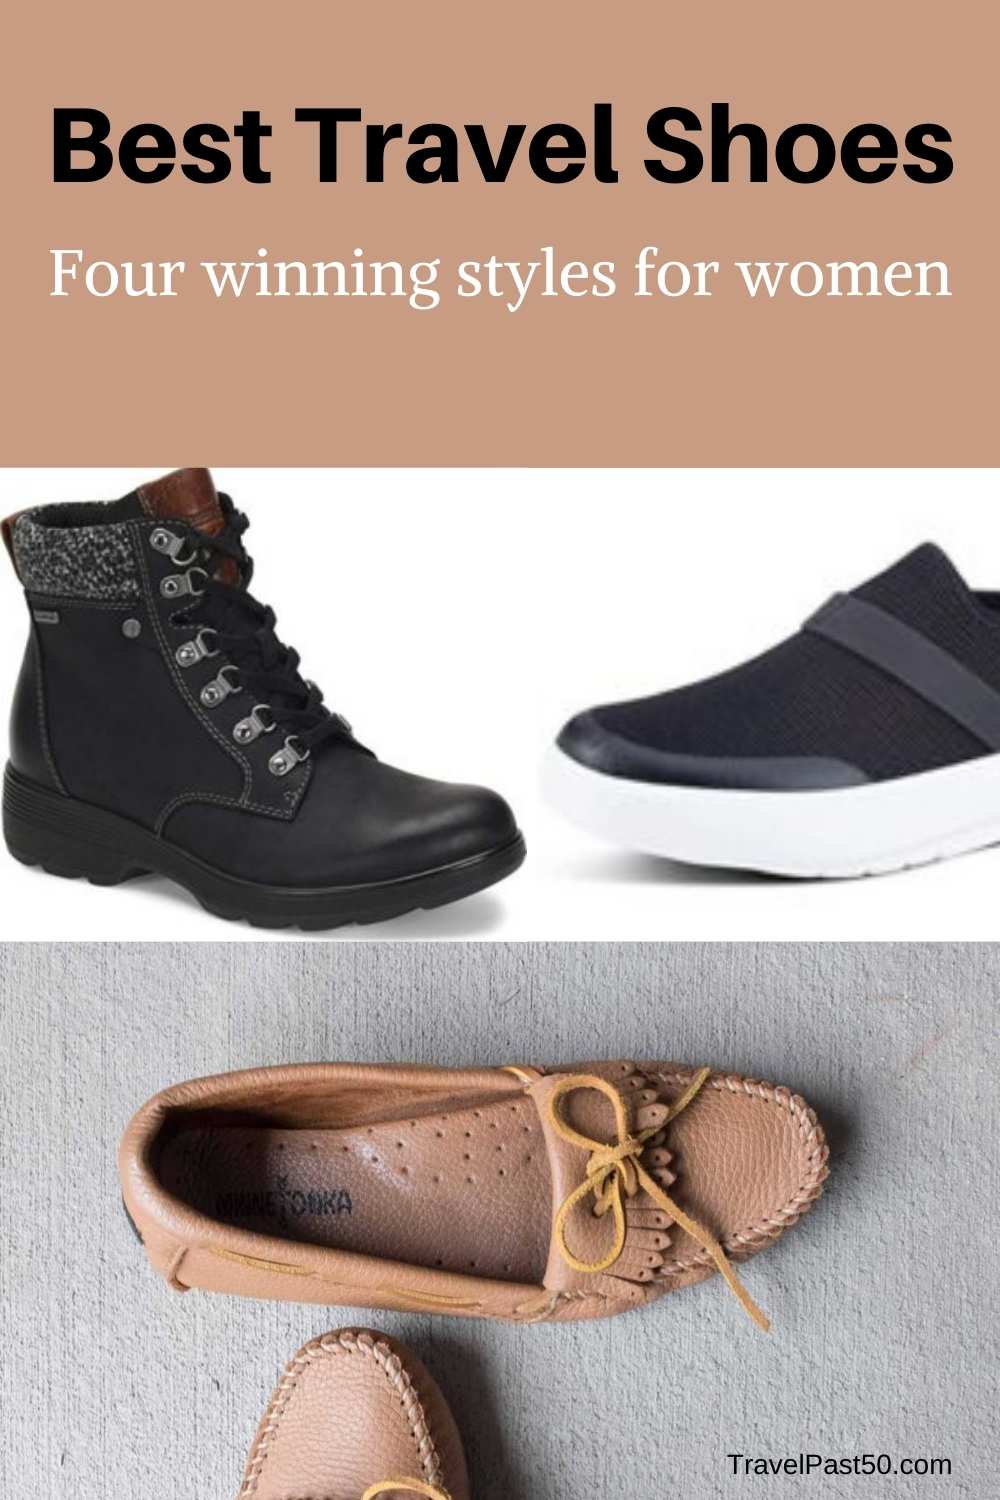 The Four Best Travel Walking Shoes for Women - Travel Past 50